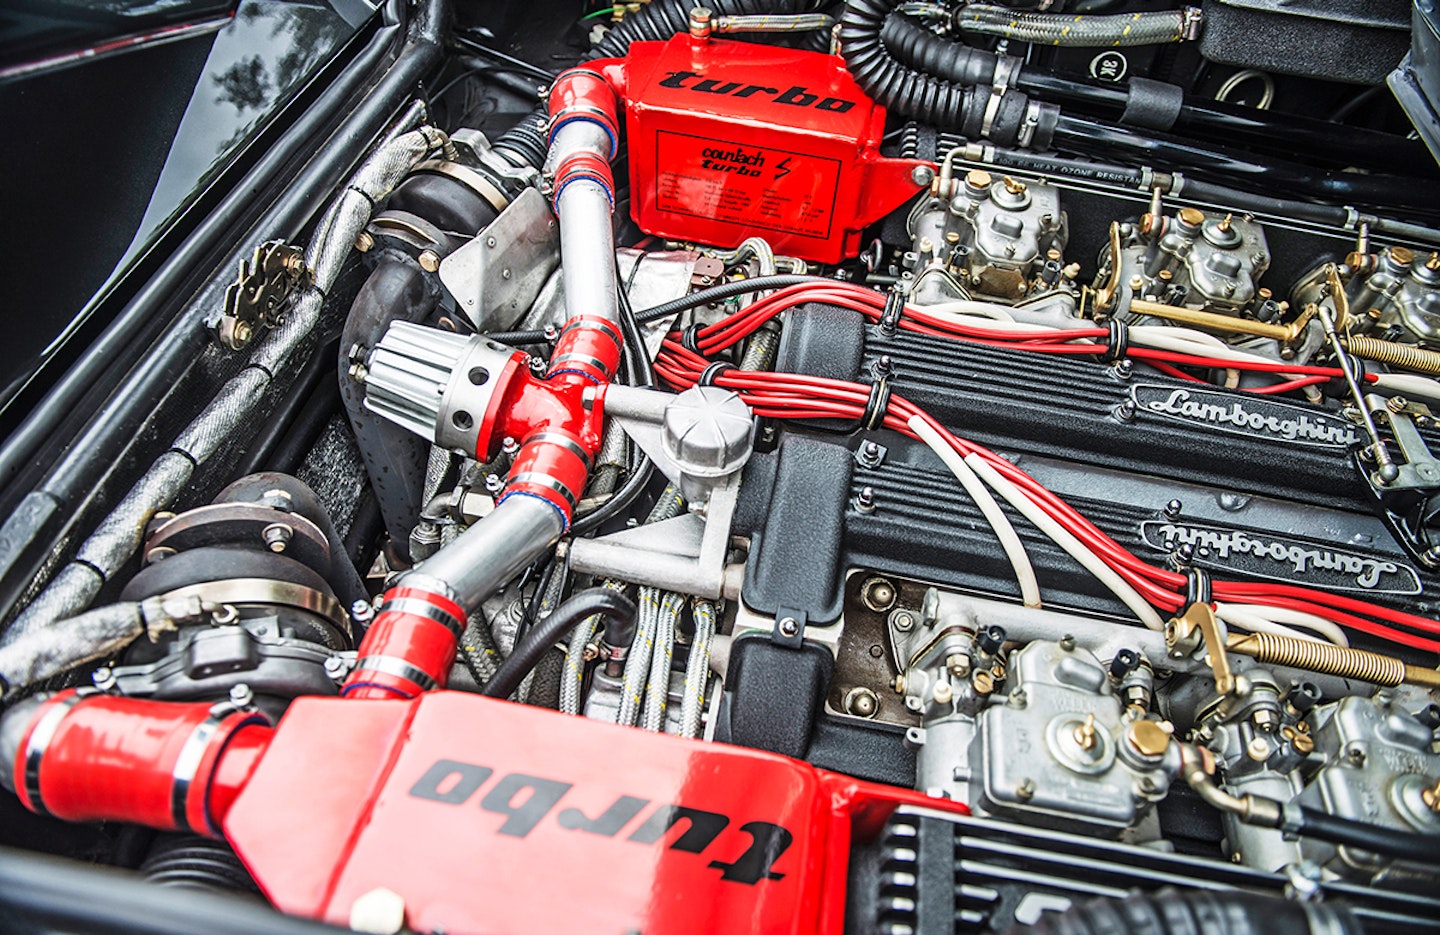 A peek into the engine bay leaves no doubt as to this 4754cc V12’s aspiration